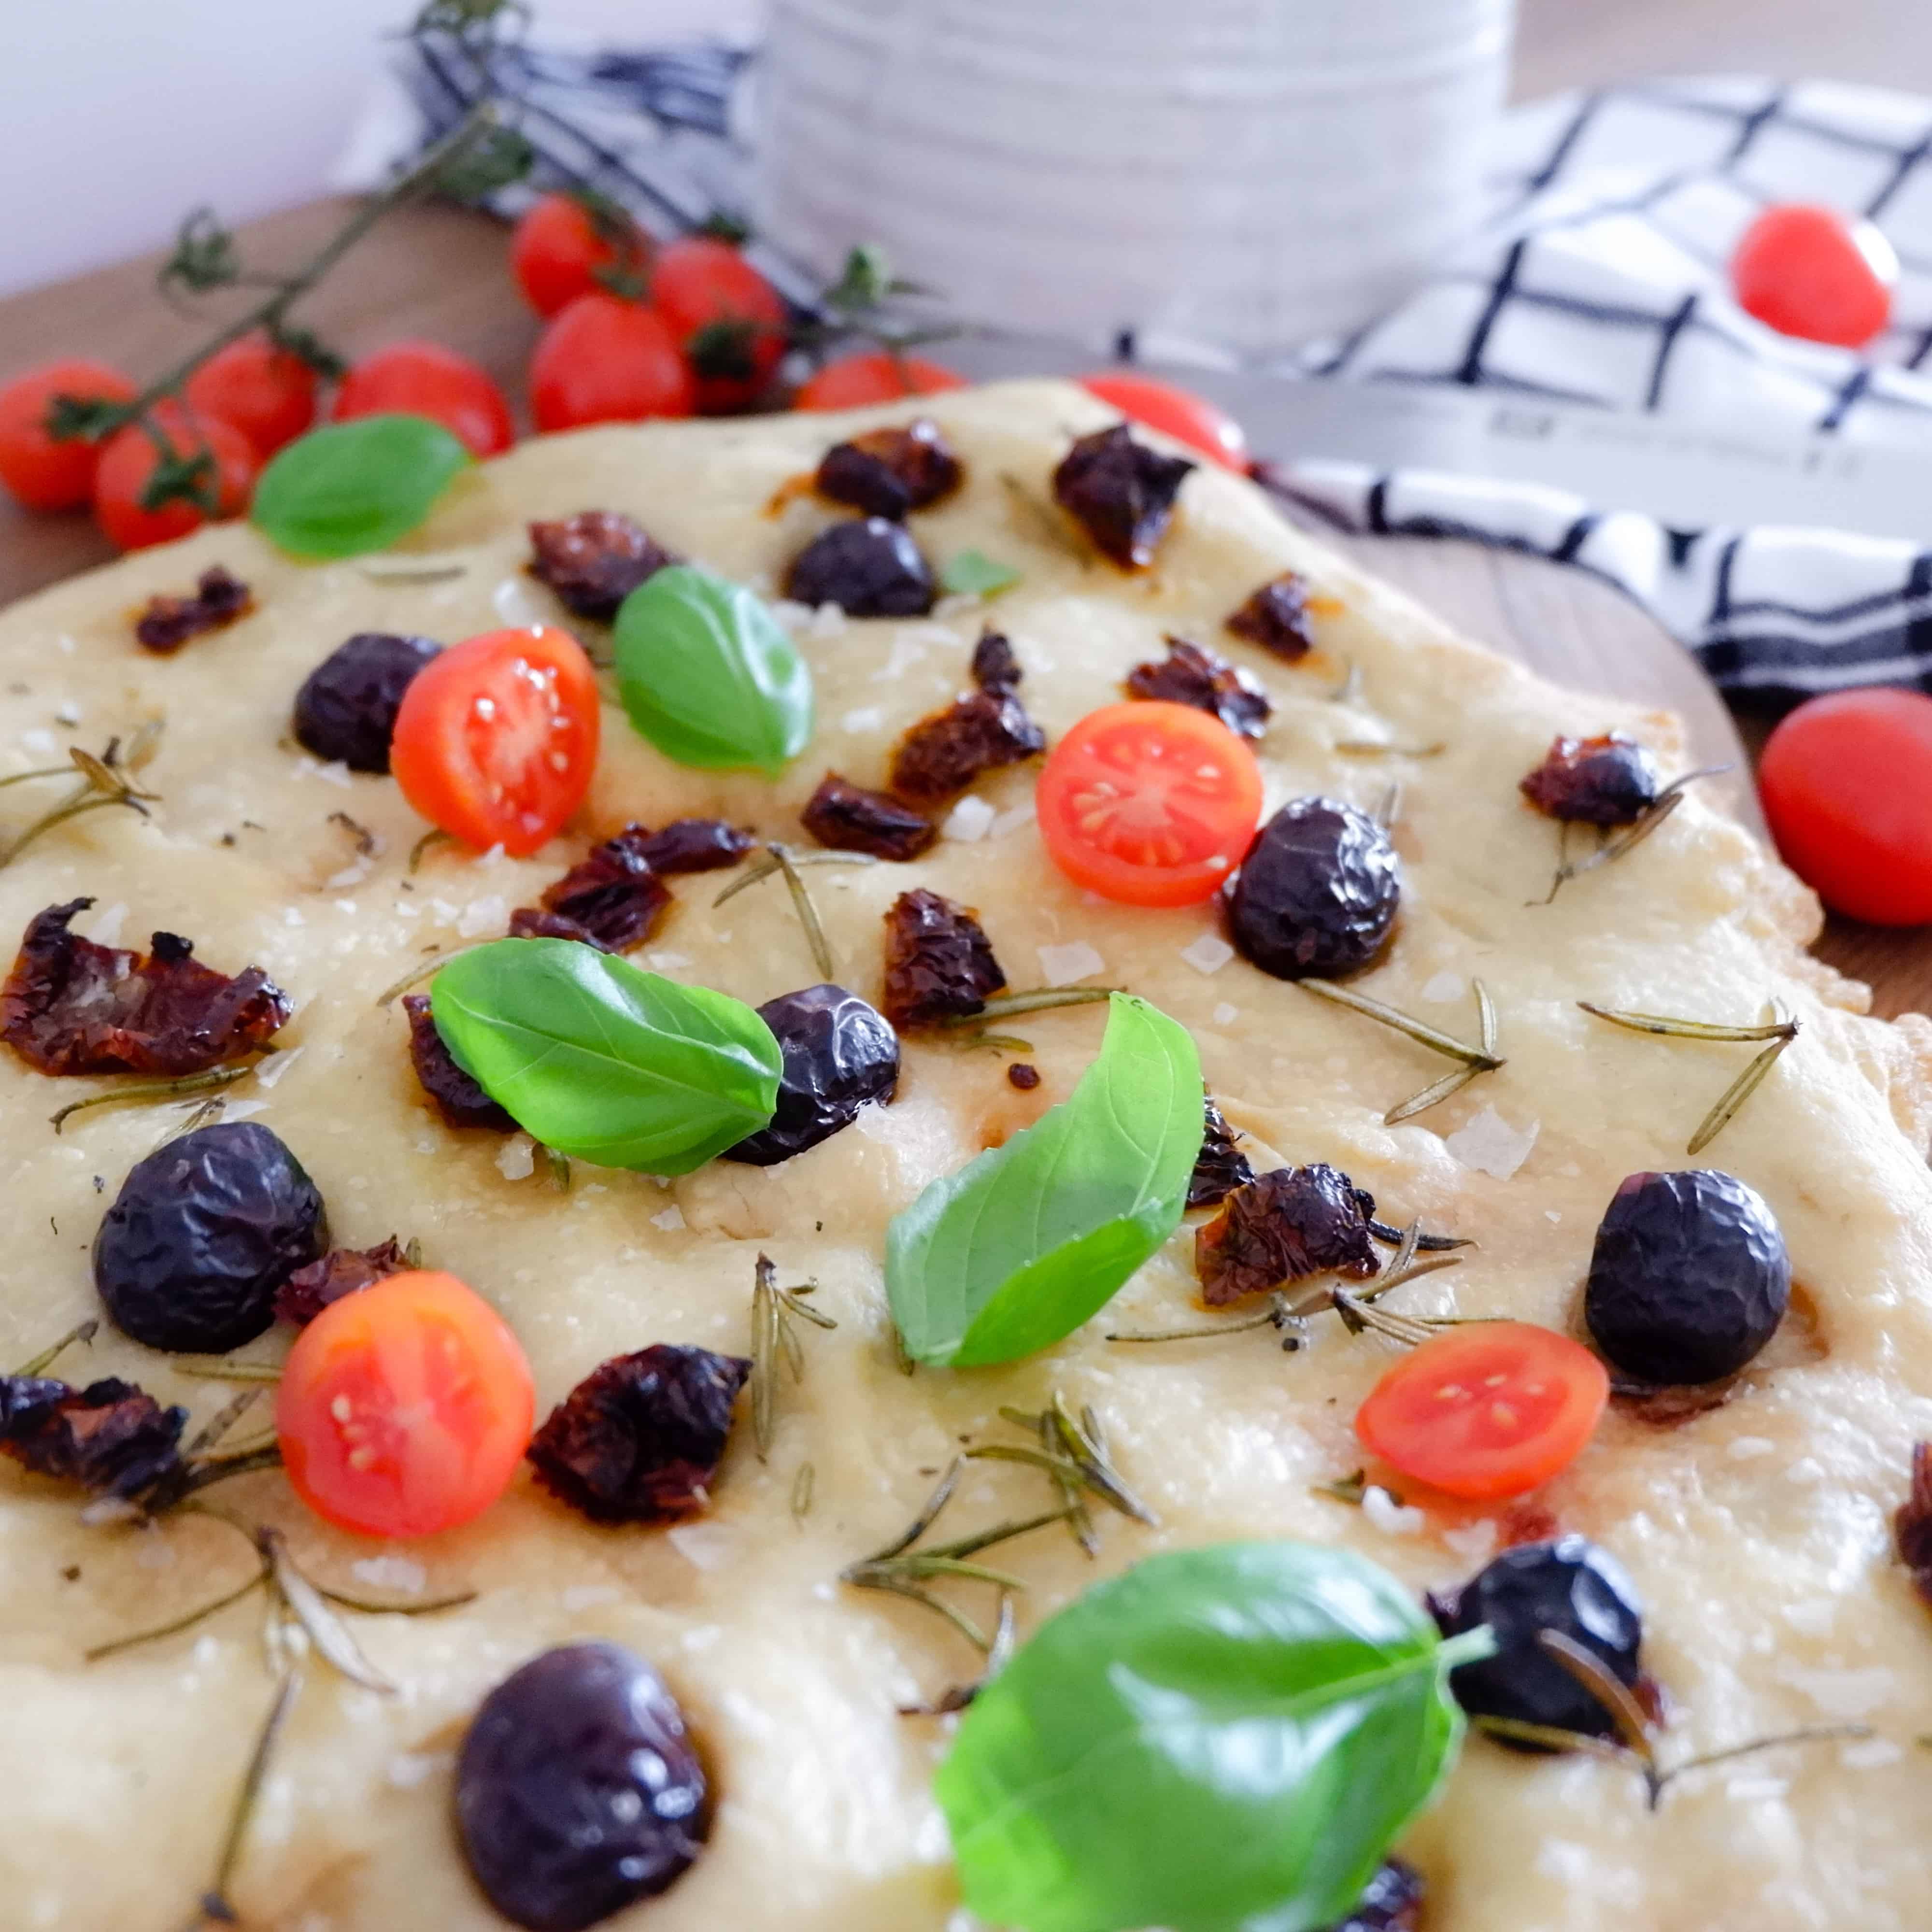 Focaccia-Oliven-Rosmarin-Tomaten - Cooking is love